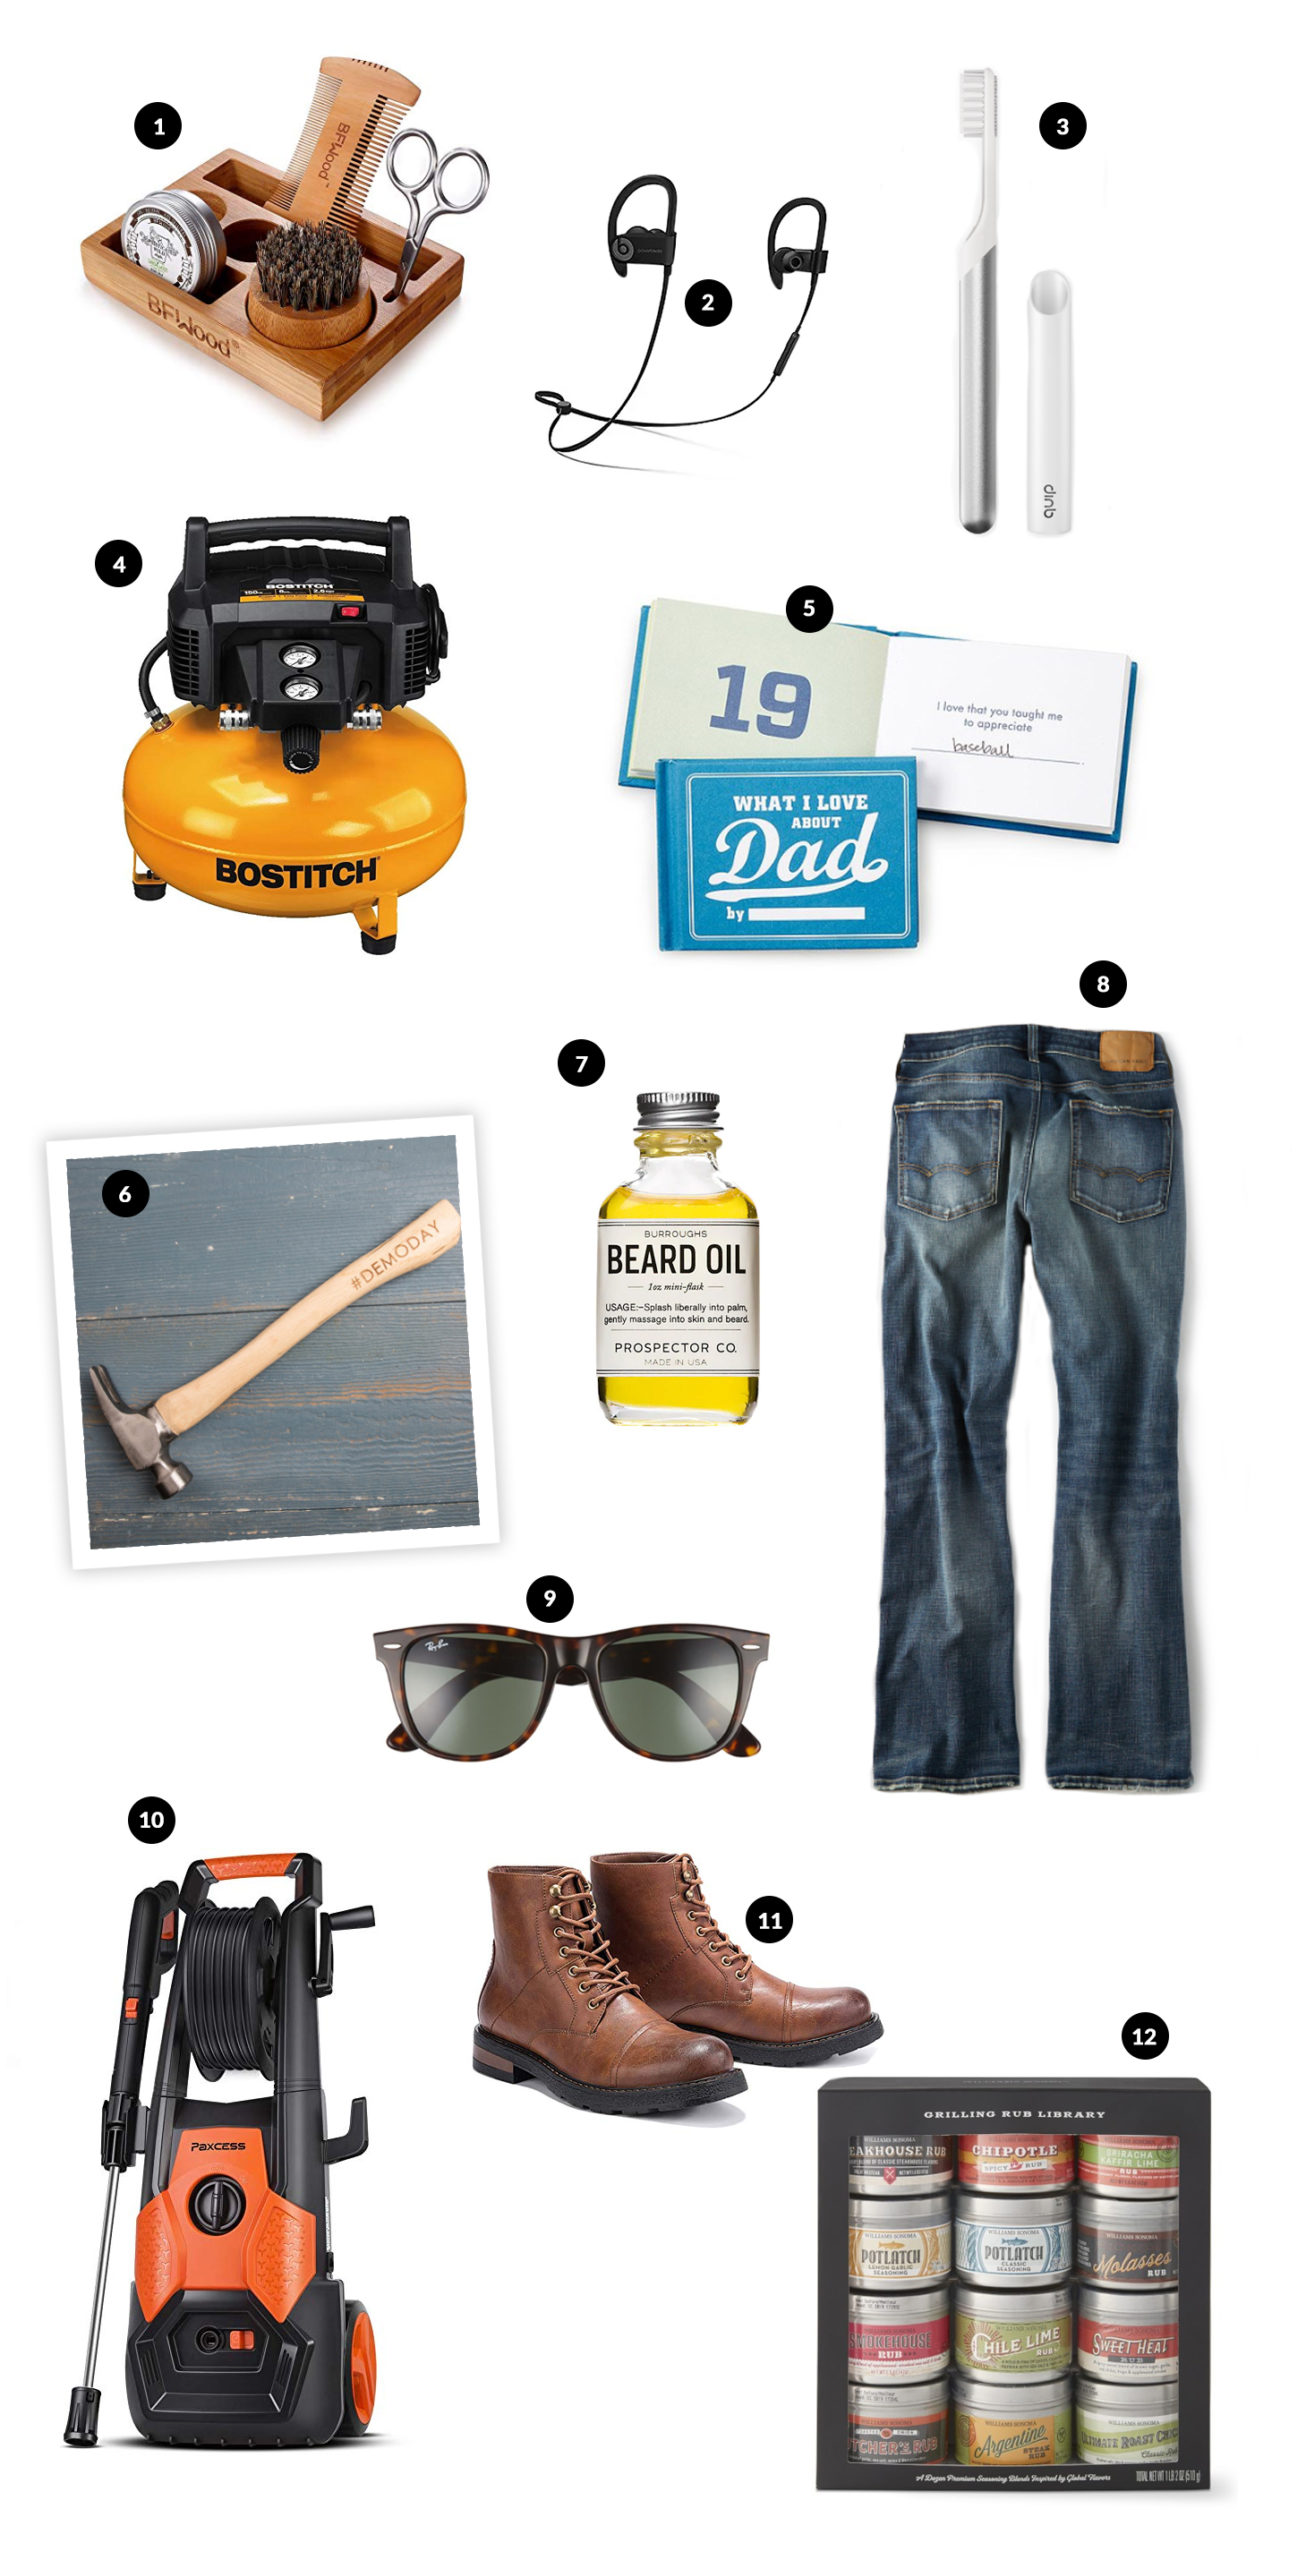 Father's Day 2019 gift guide. Catch my top twelve ideas and what my husband said he would love to get this year! All of it on Haus of Layne #FathersDayGiftIdeas #FathersDay2019 #GiftIdeasforDad #GiftIdeasforHim